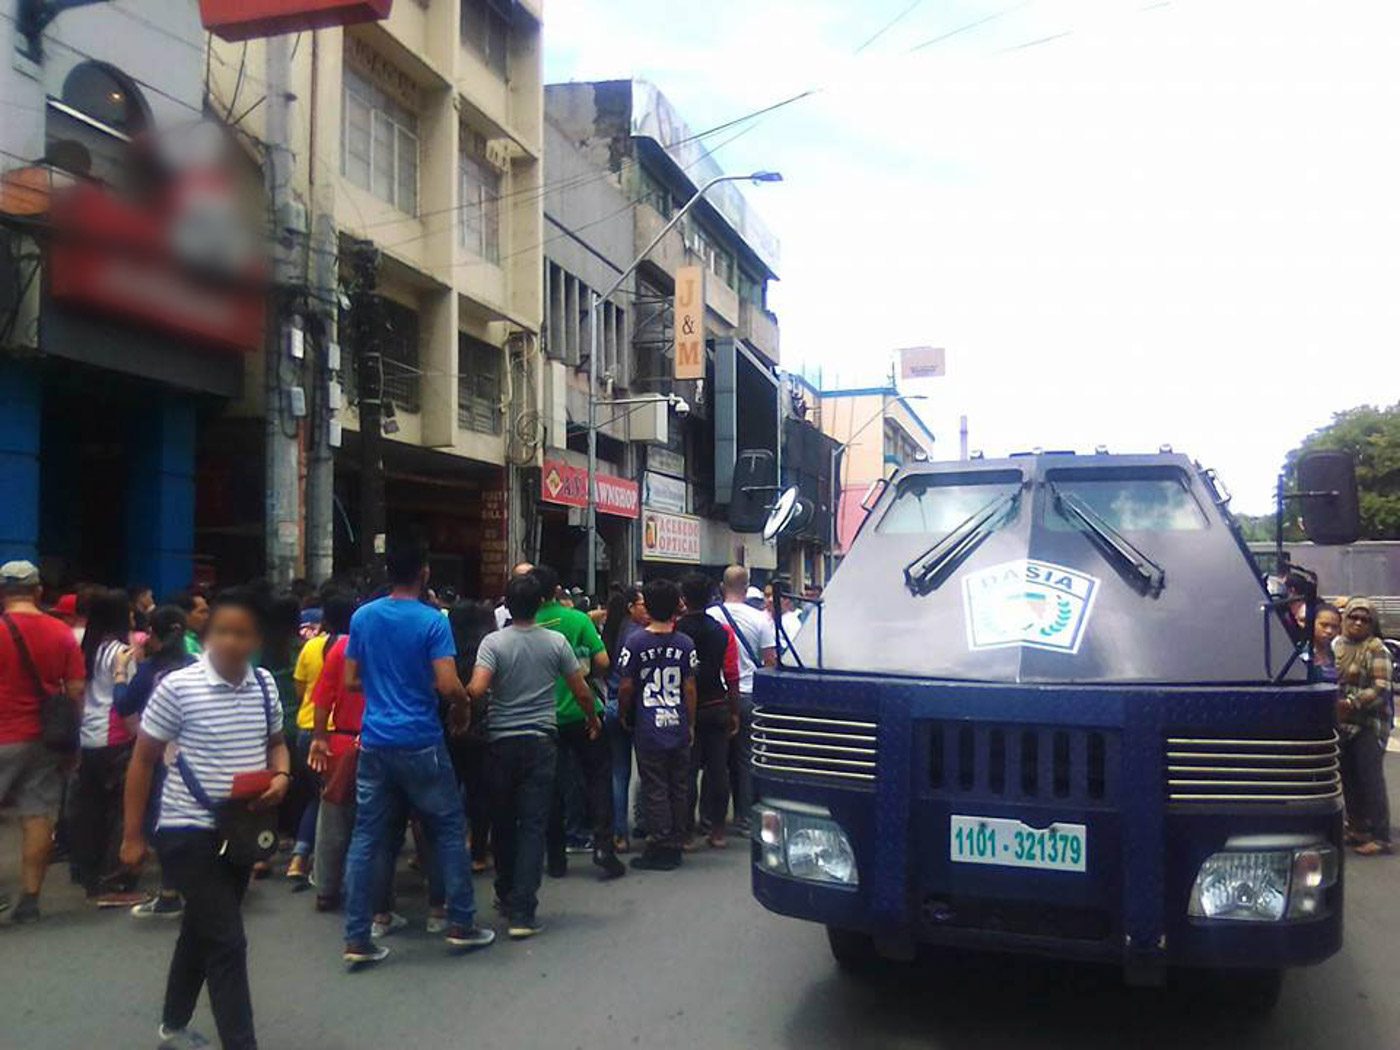 Armored car kills 2-year-old boy in Davao City pedestrian accident